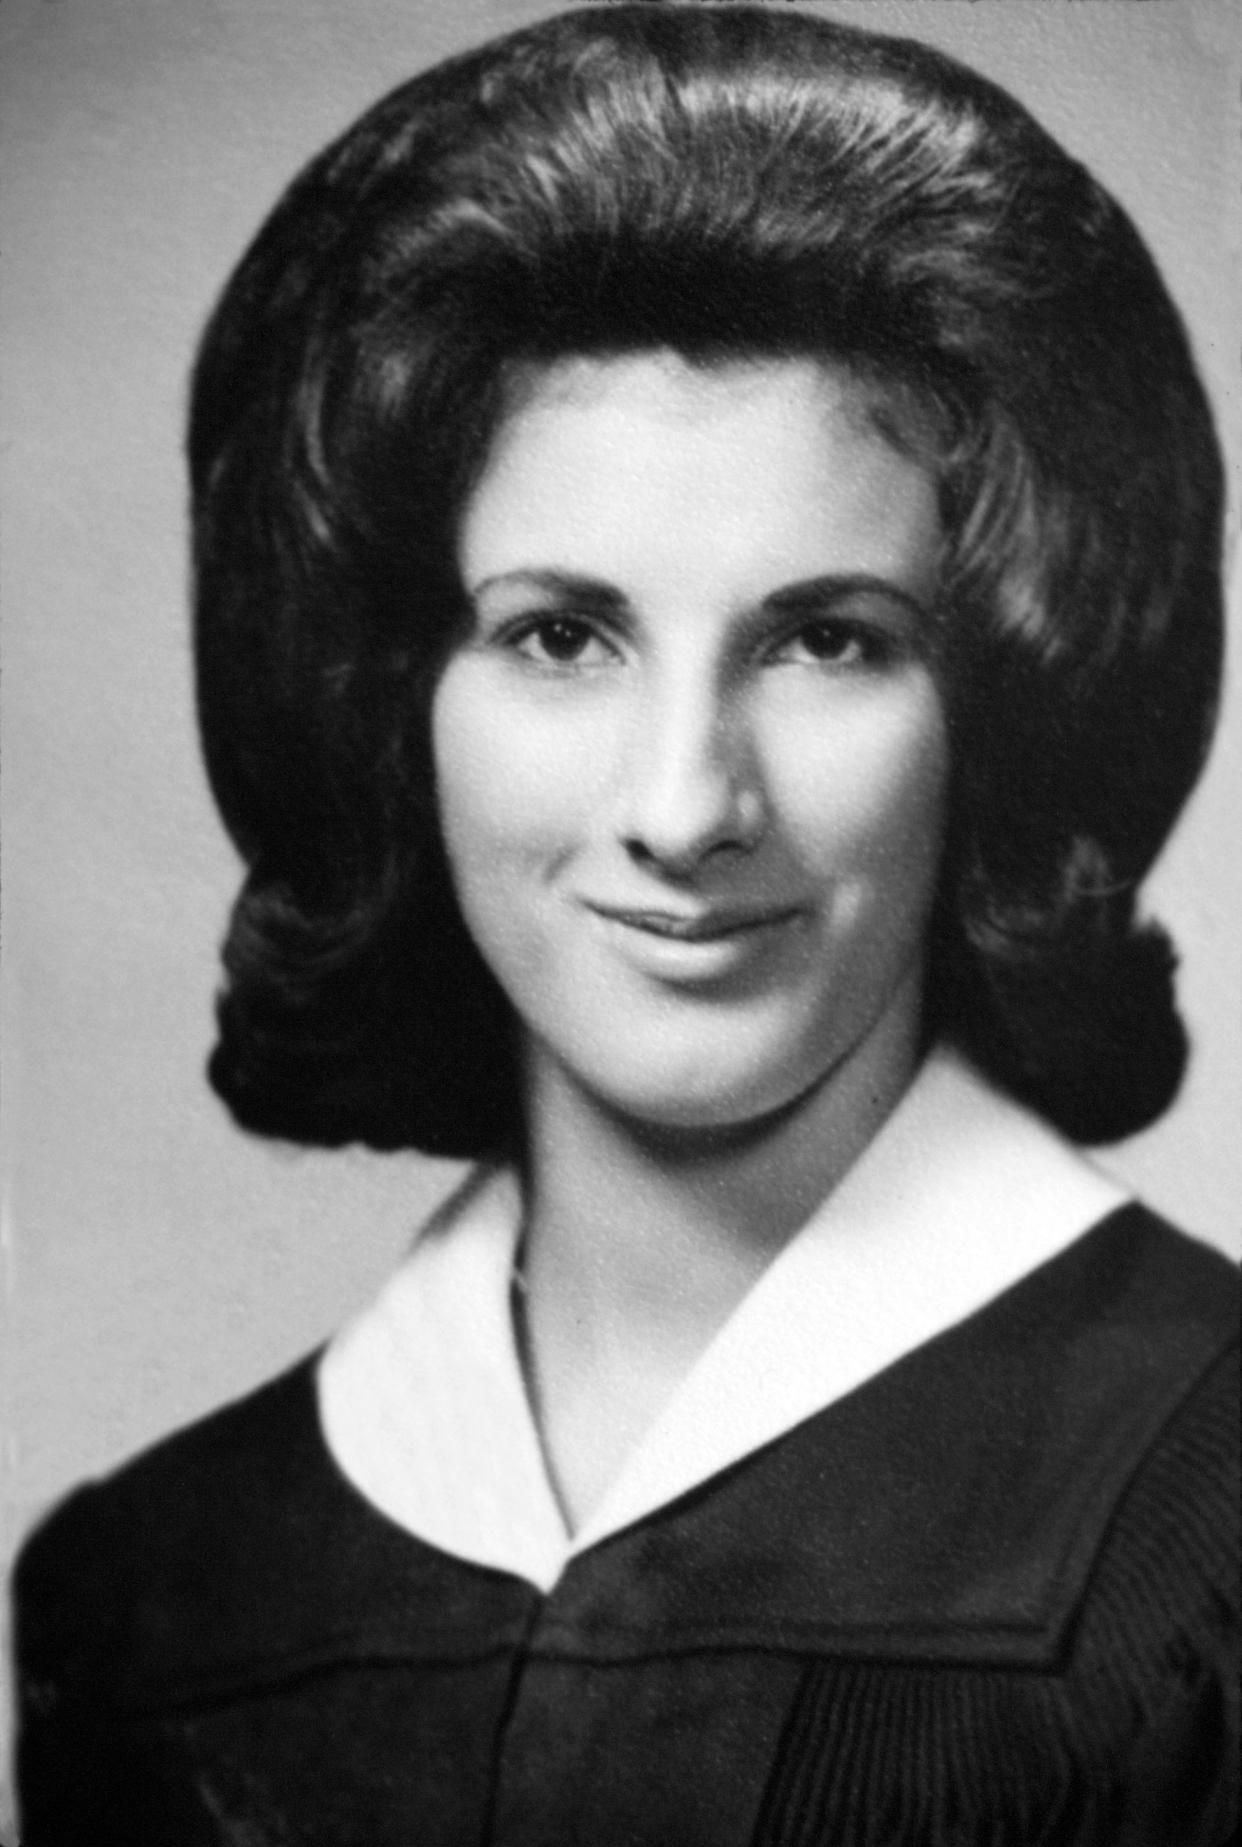 Undated photograph of Karen Silkwood. --- Photo by Mark Peterson/Corbis SABA (Photo by mark peterson/Corbis via Getty Images)